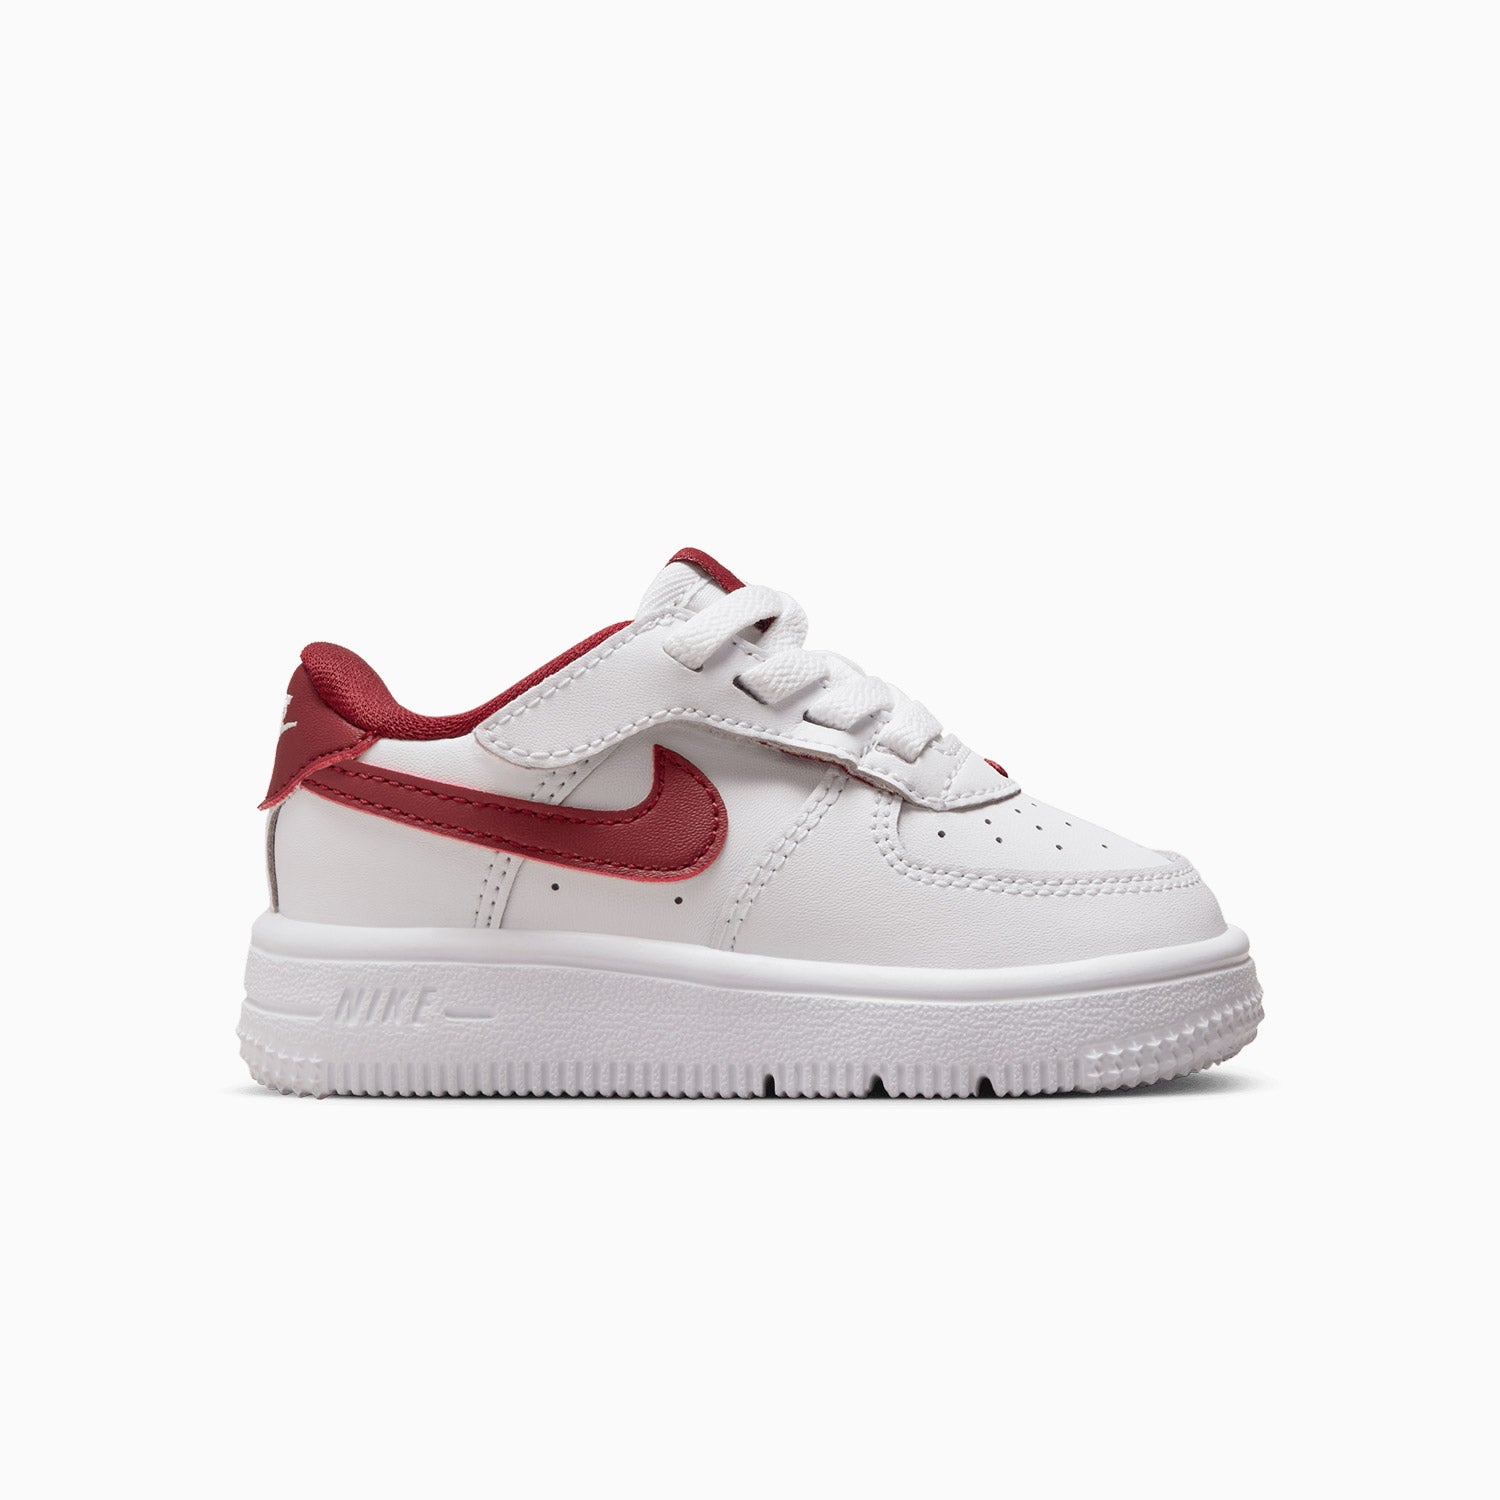 nike-kids-air-force-1-low-easyon-white-red-toddlers-shoes-fn0236-105